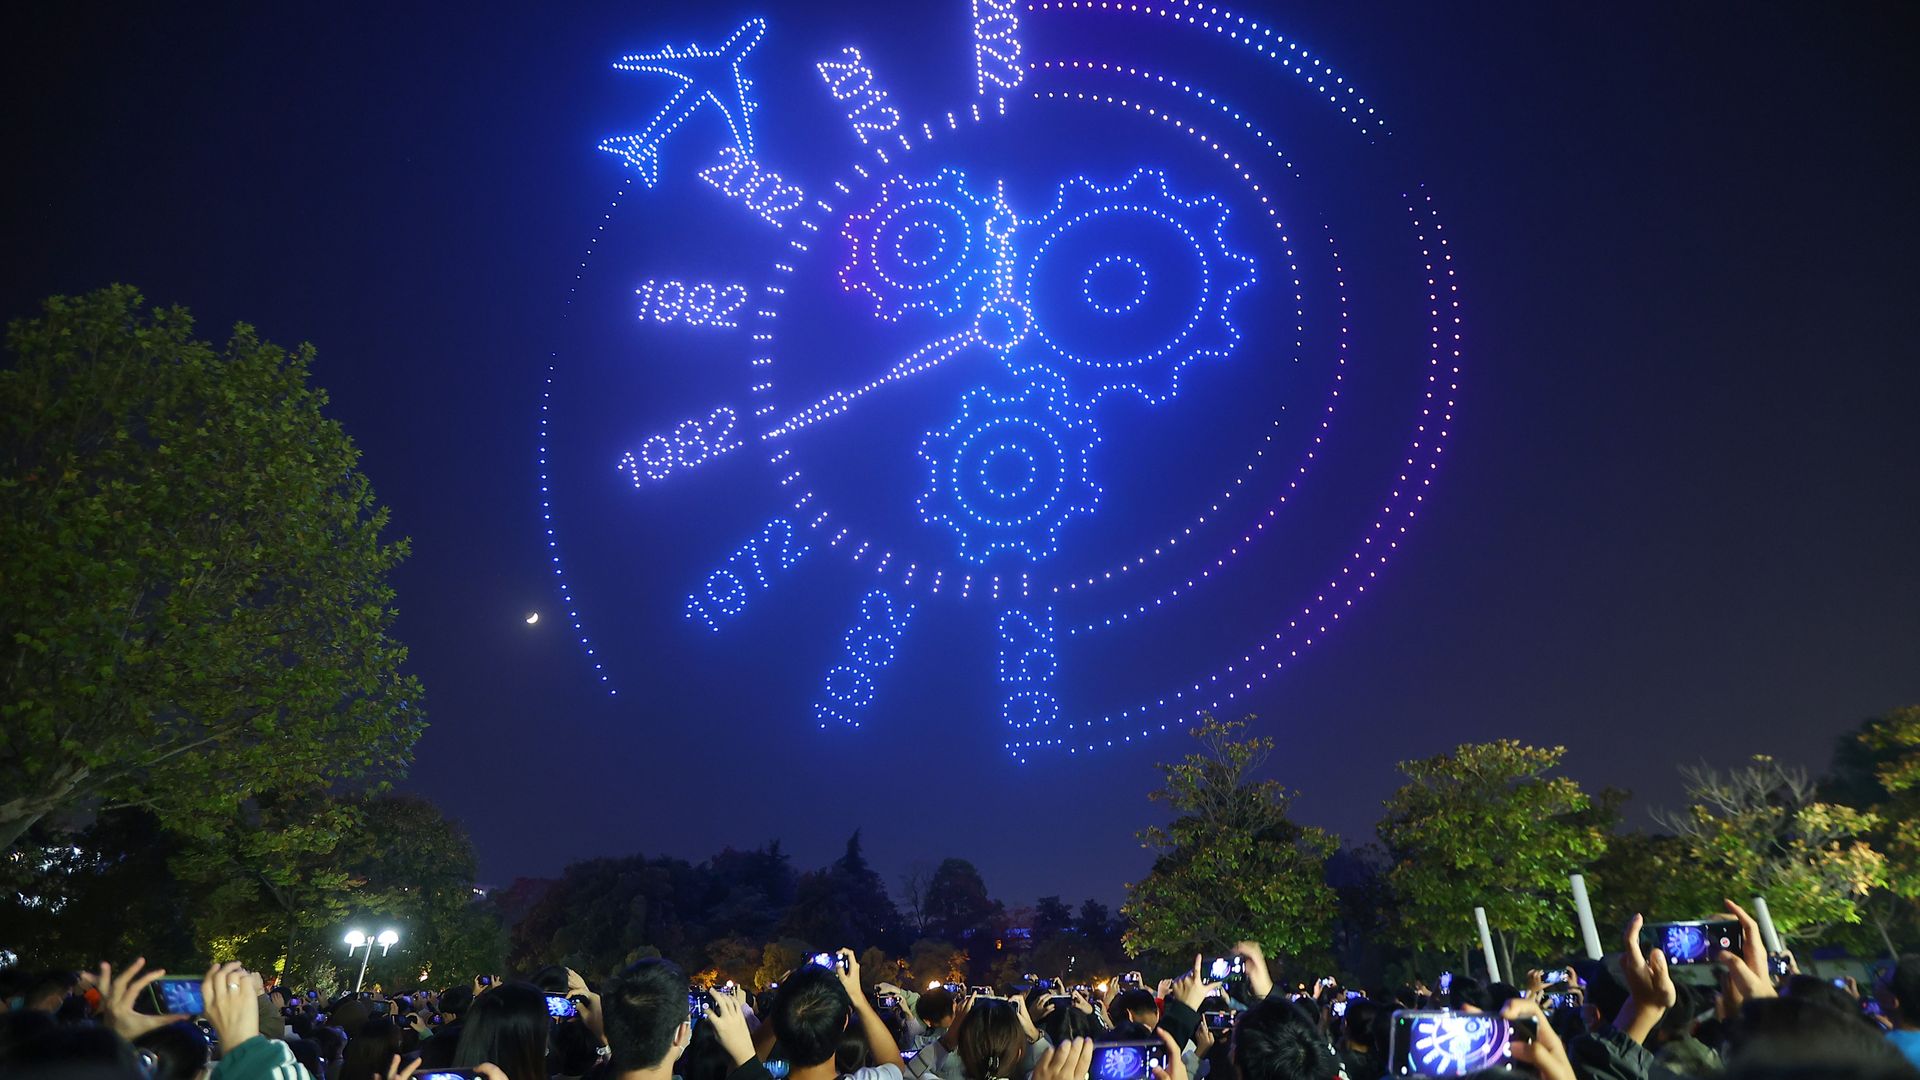 Drones form a pattern during a light show to celebrate the 70th founding anniversary of Nanjing University of Aeronautics and Astronautics on October 30, 2022 in Nanjing, Jiangsu Province of China.